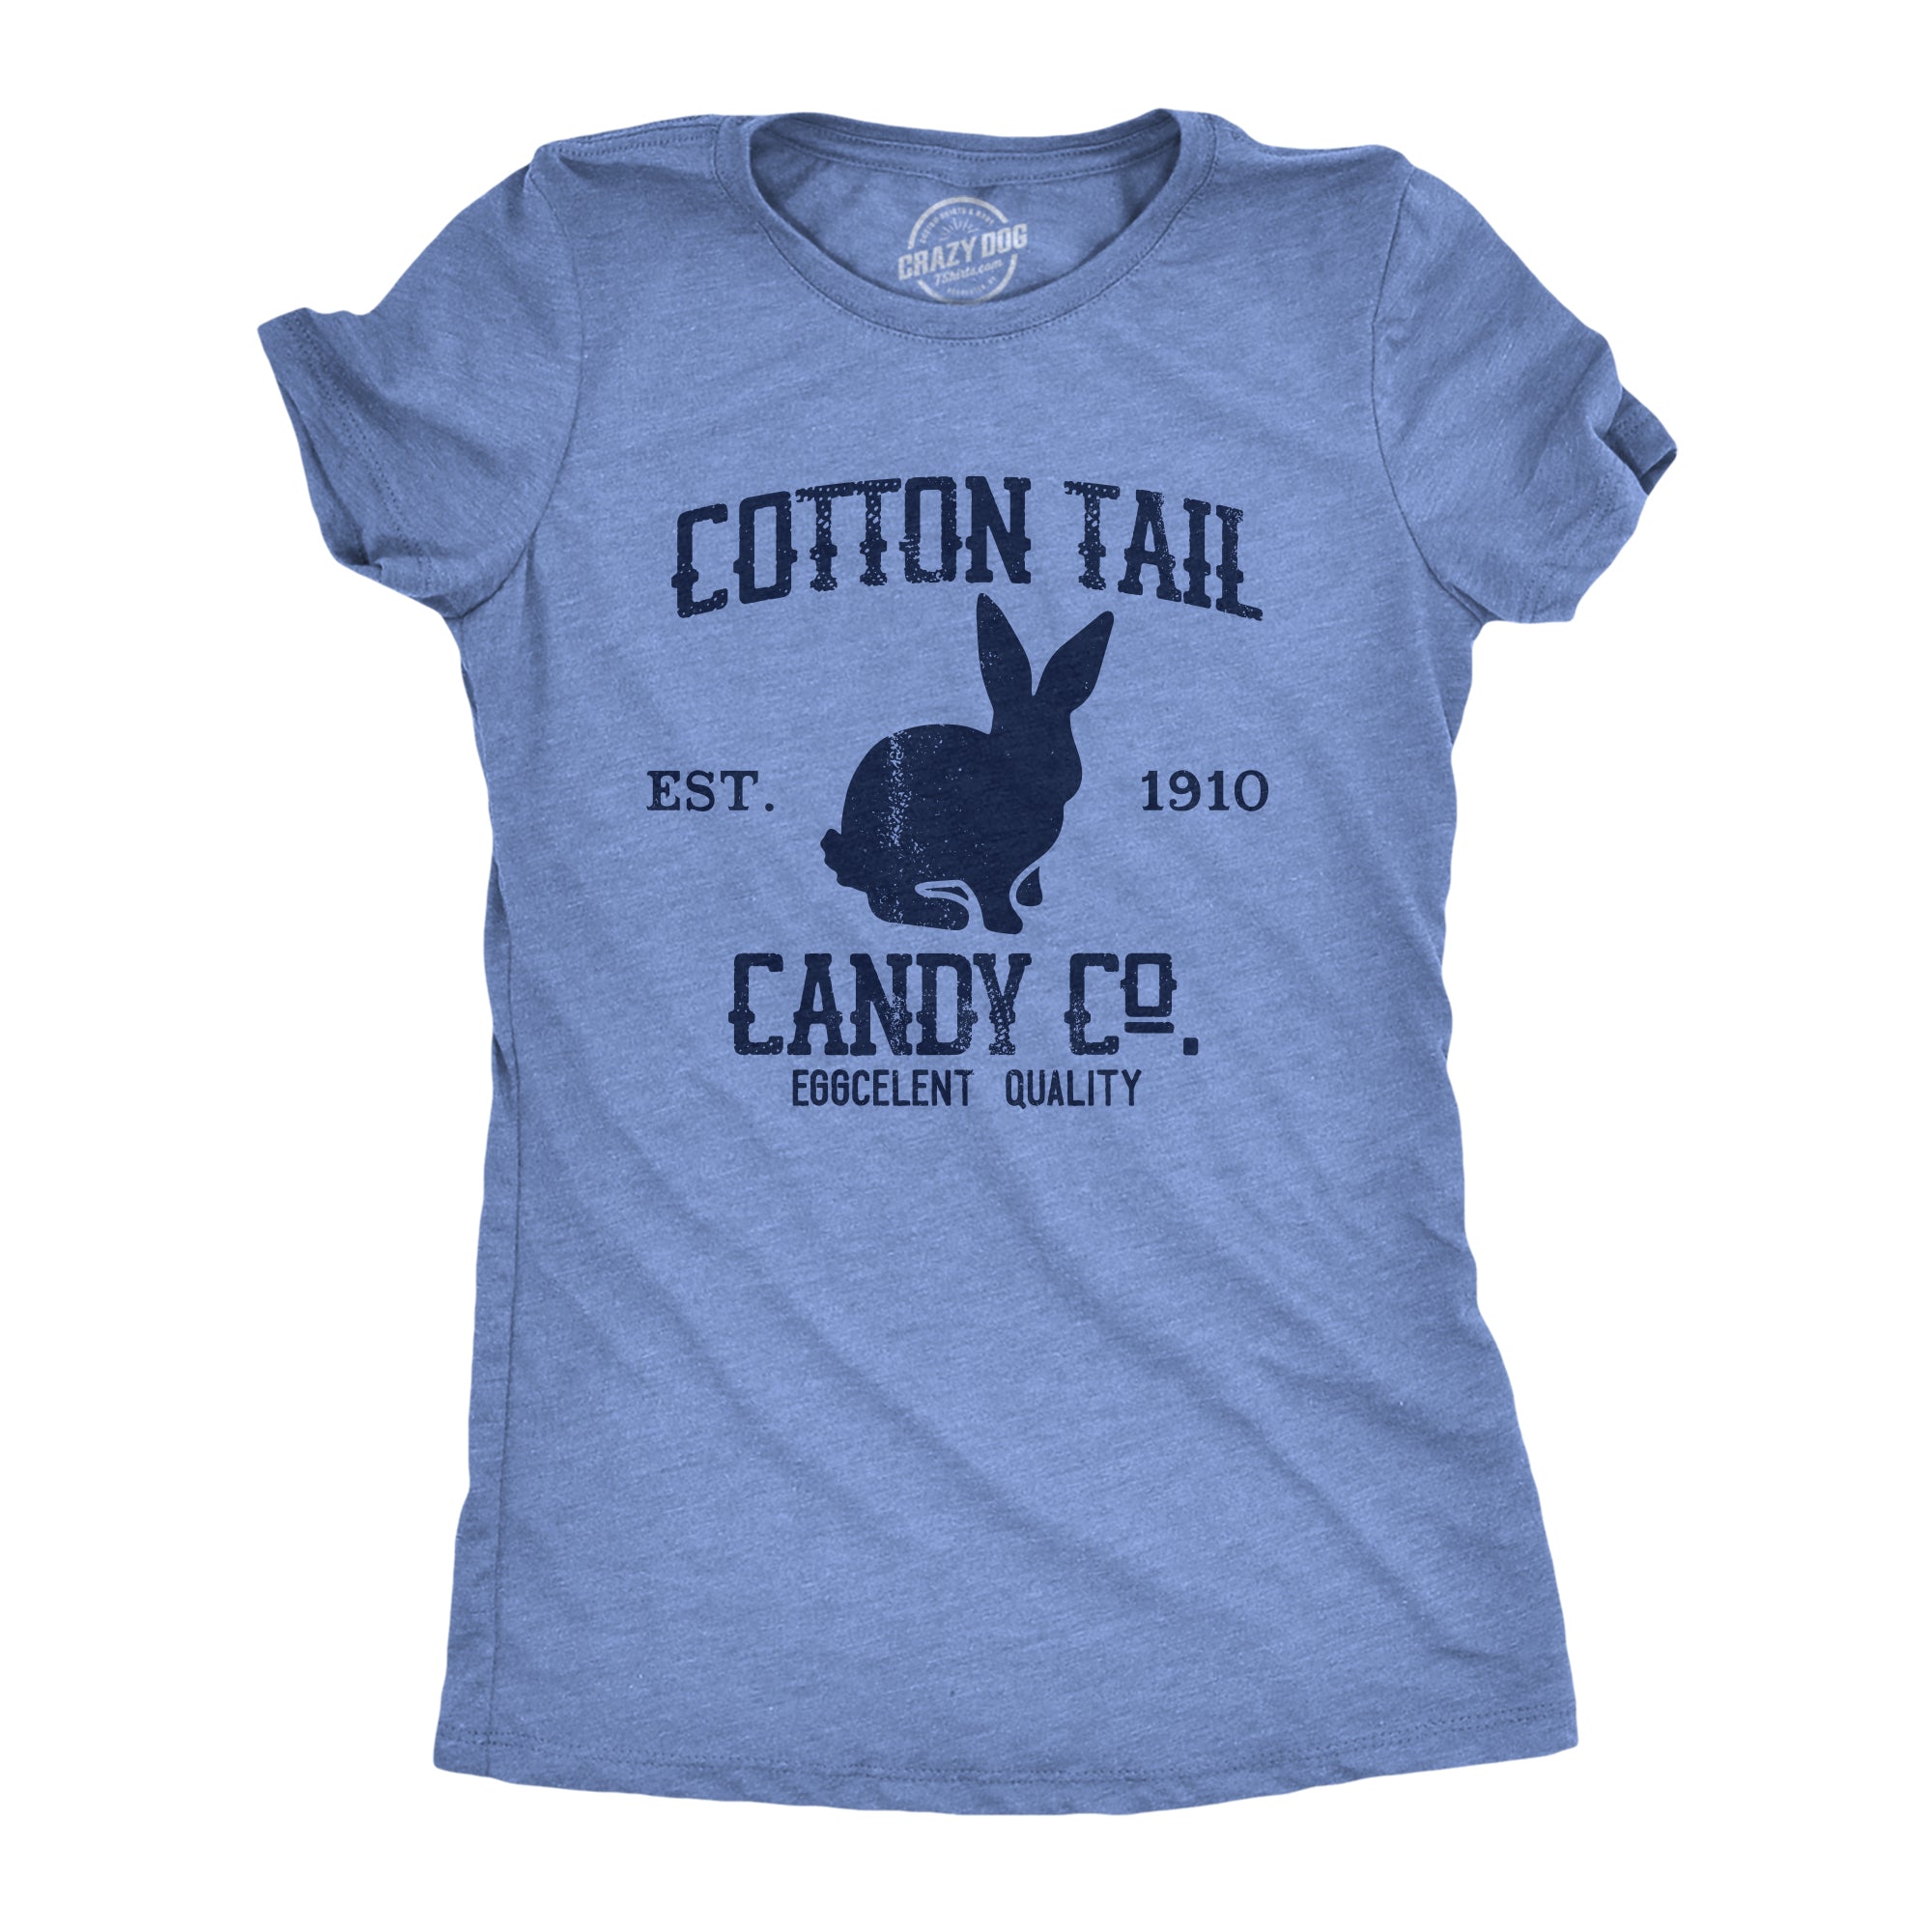 Funny Light Heather Blue - Cottontail Candy Cotton Tail Candy Co Womens T Shirt Nerdy Easter Food Tee